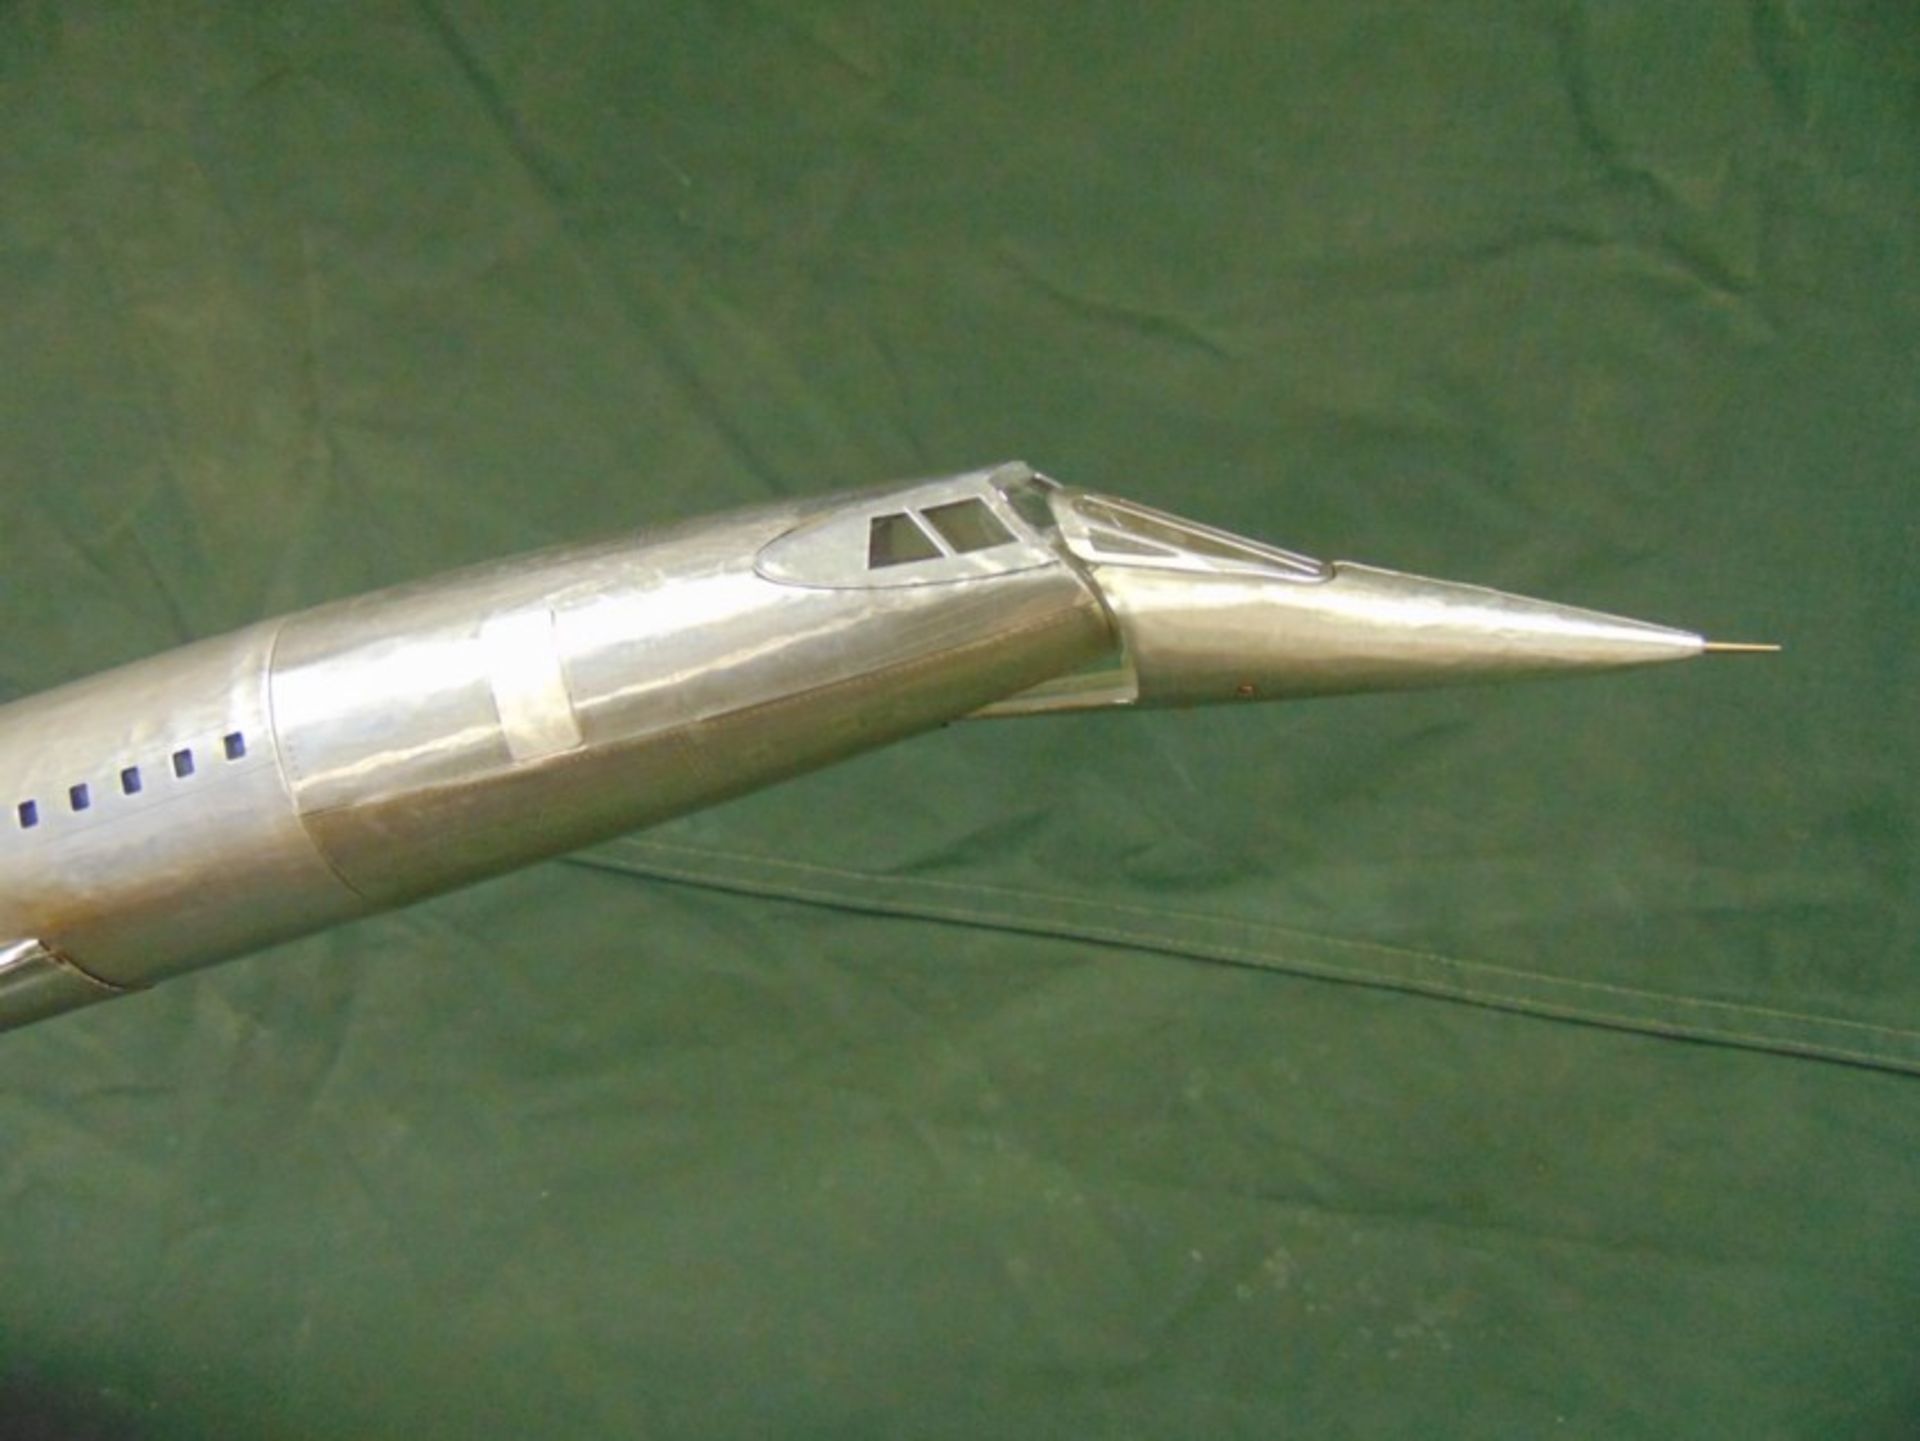 NEW JUST LANDED Large Aluminium Concorde Model - Image 7 of 14